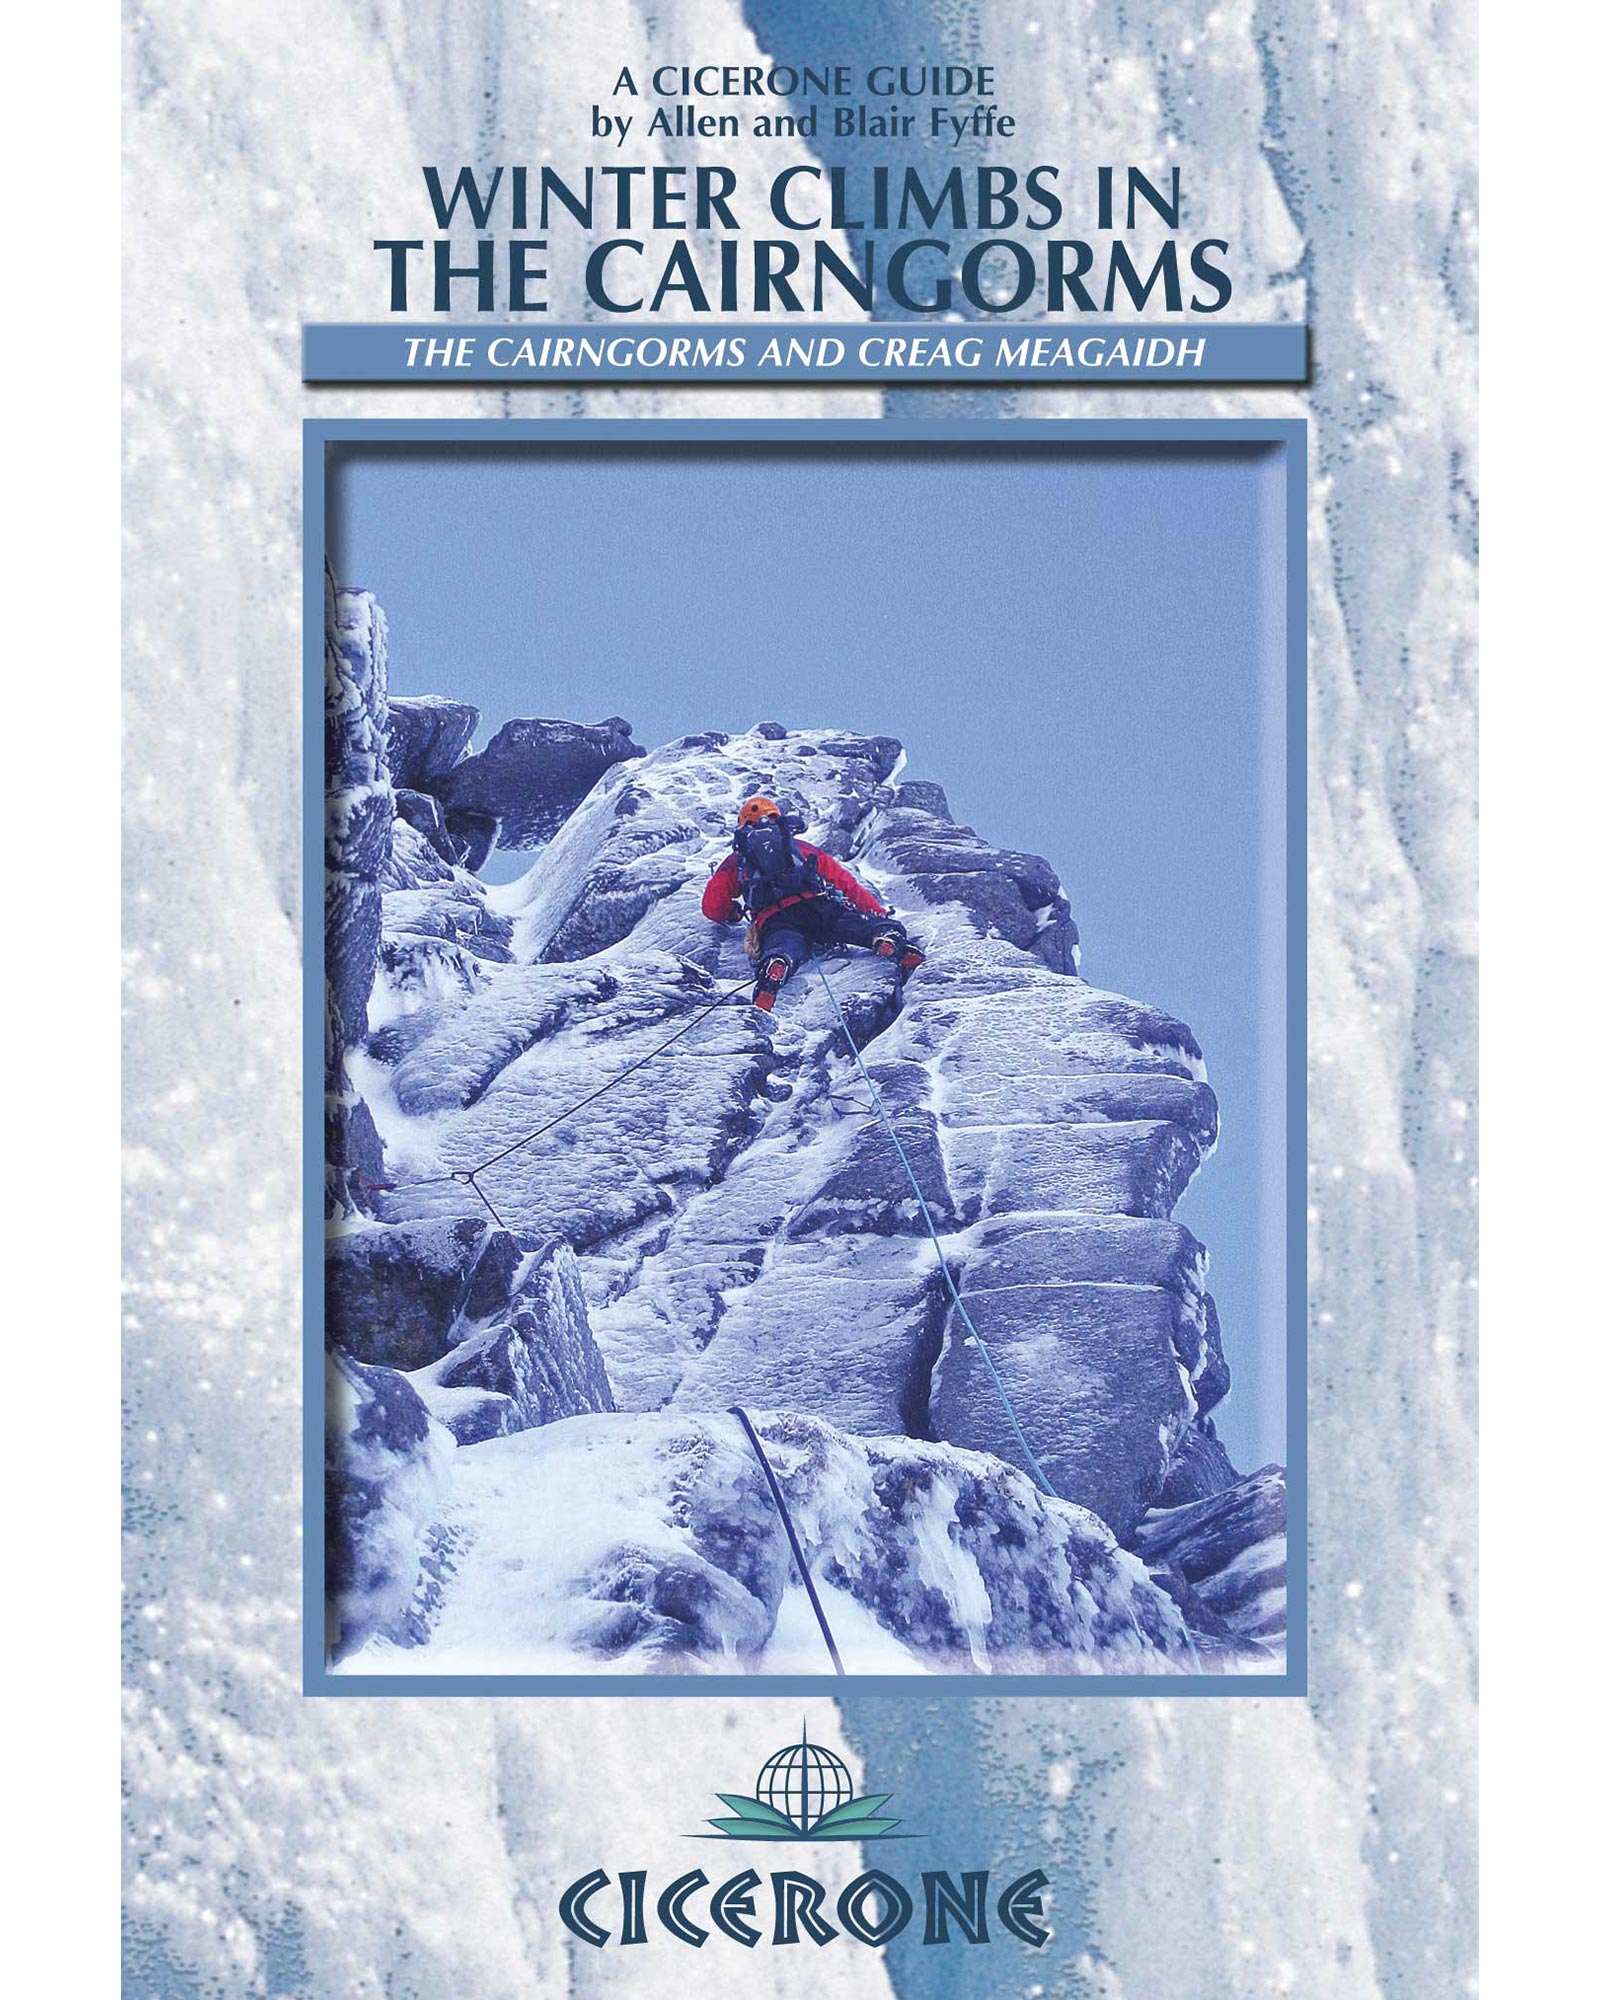 Cicerone Winter Climbs in the Cairngorms  Guide Book